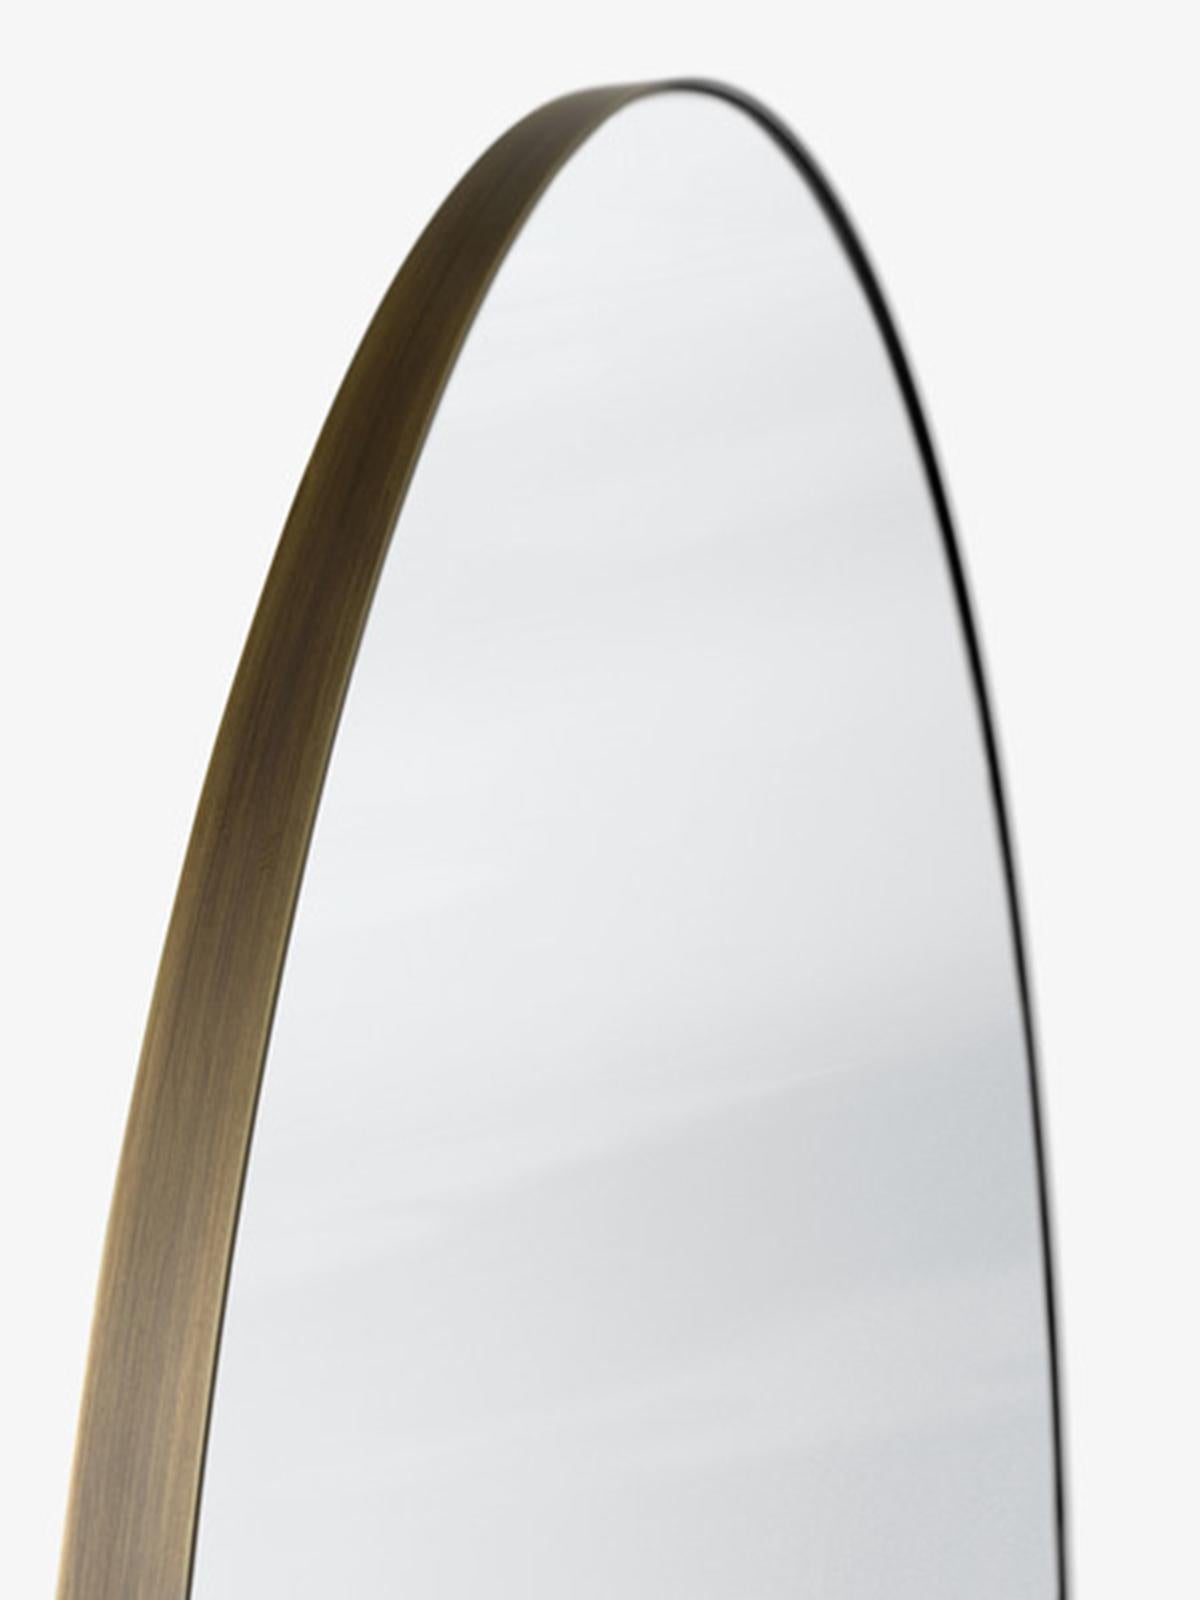 First designed for the SAS Royal Hotel in Copenhagen by Space Copenhagen, this geometric mirror comes in a circular version in Ø: 115cm/46in, D: 3cm/1.2in. 
Having a bronzed brass frame and a silver-colored mirror.